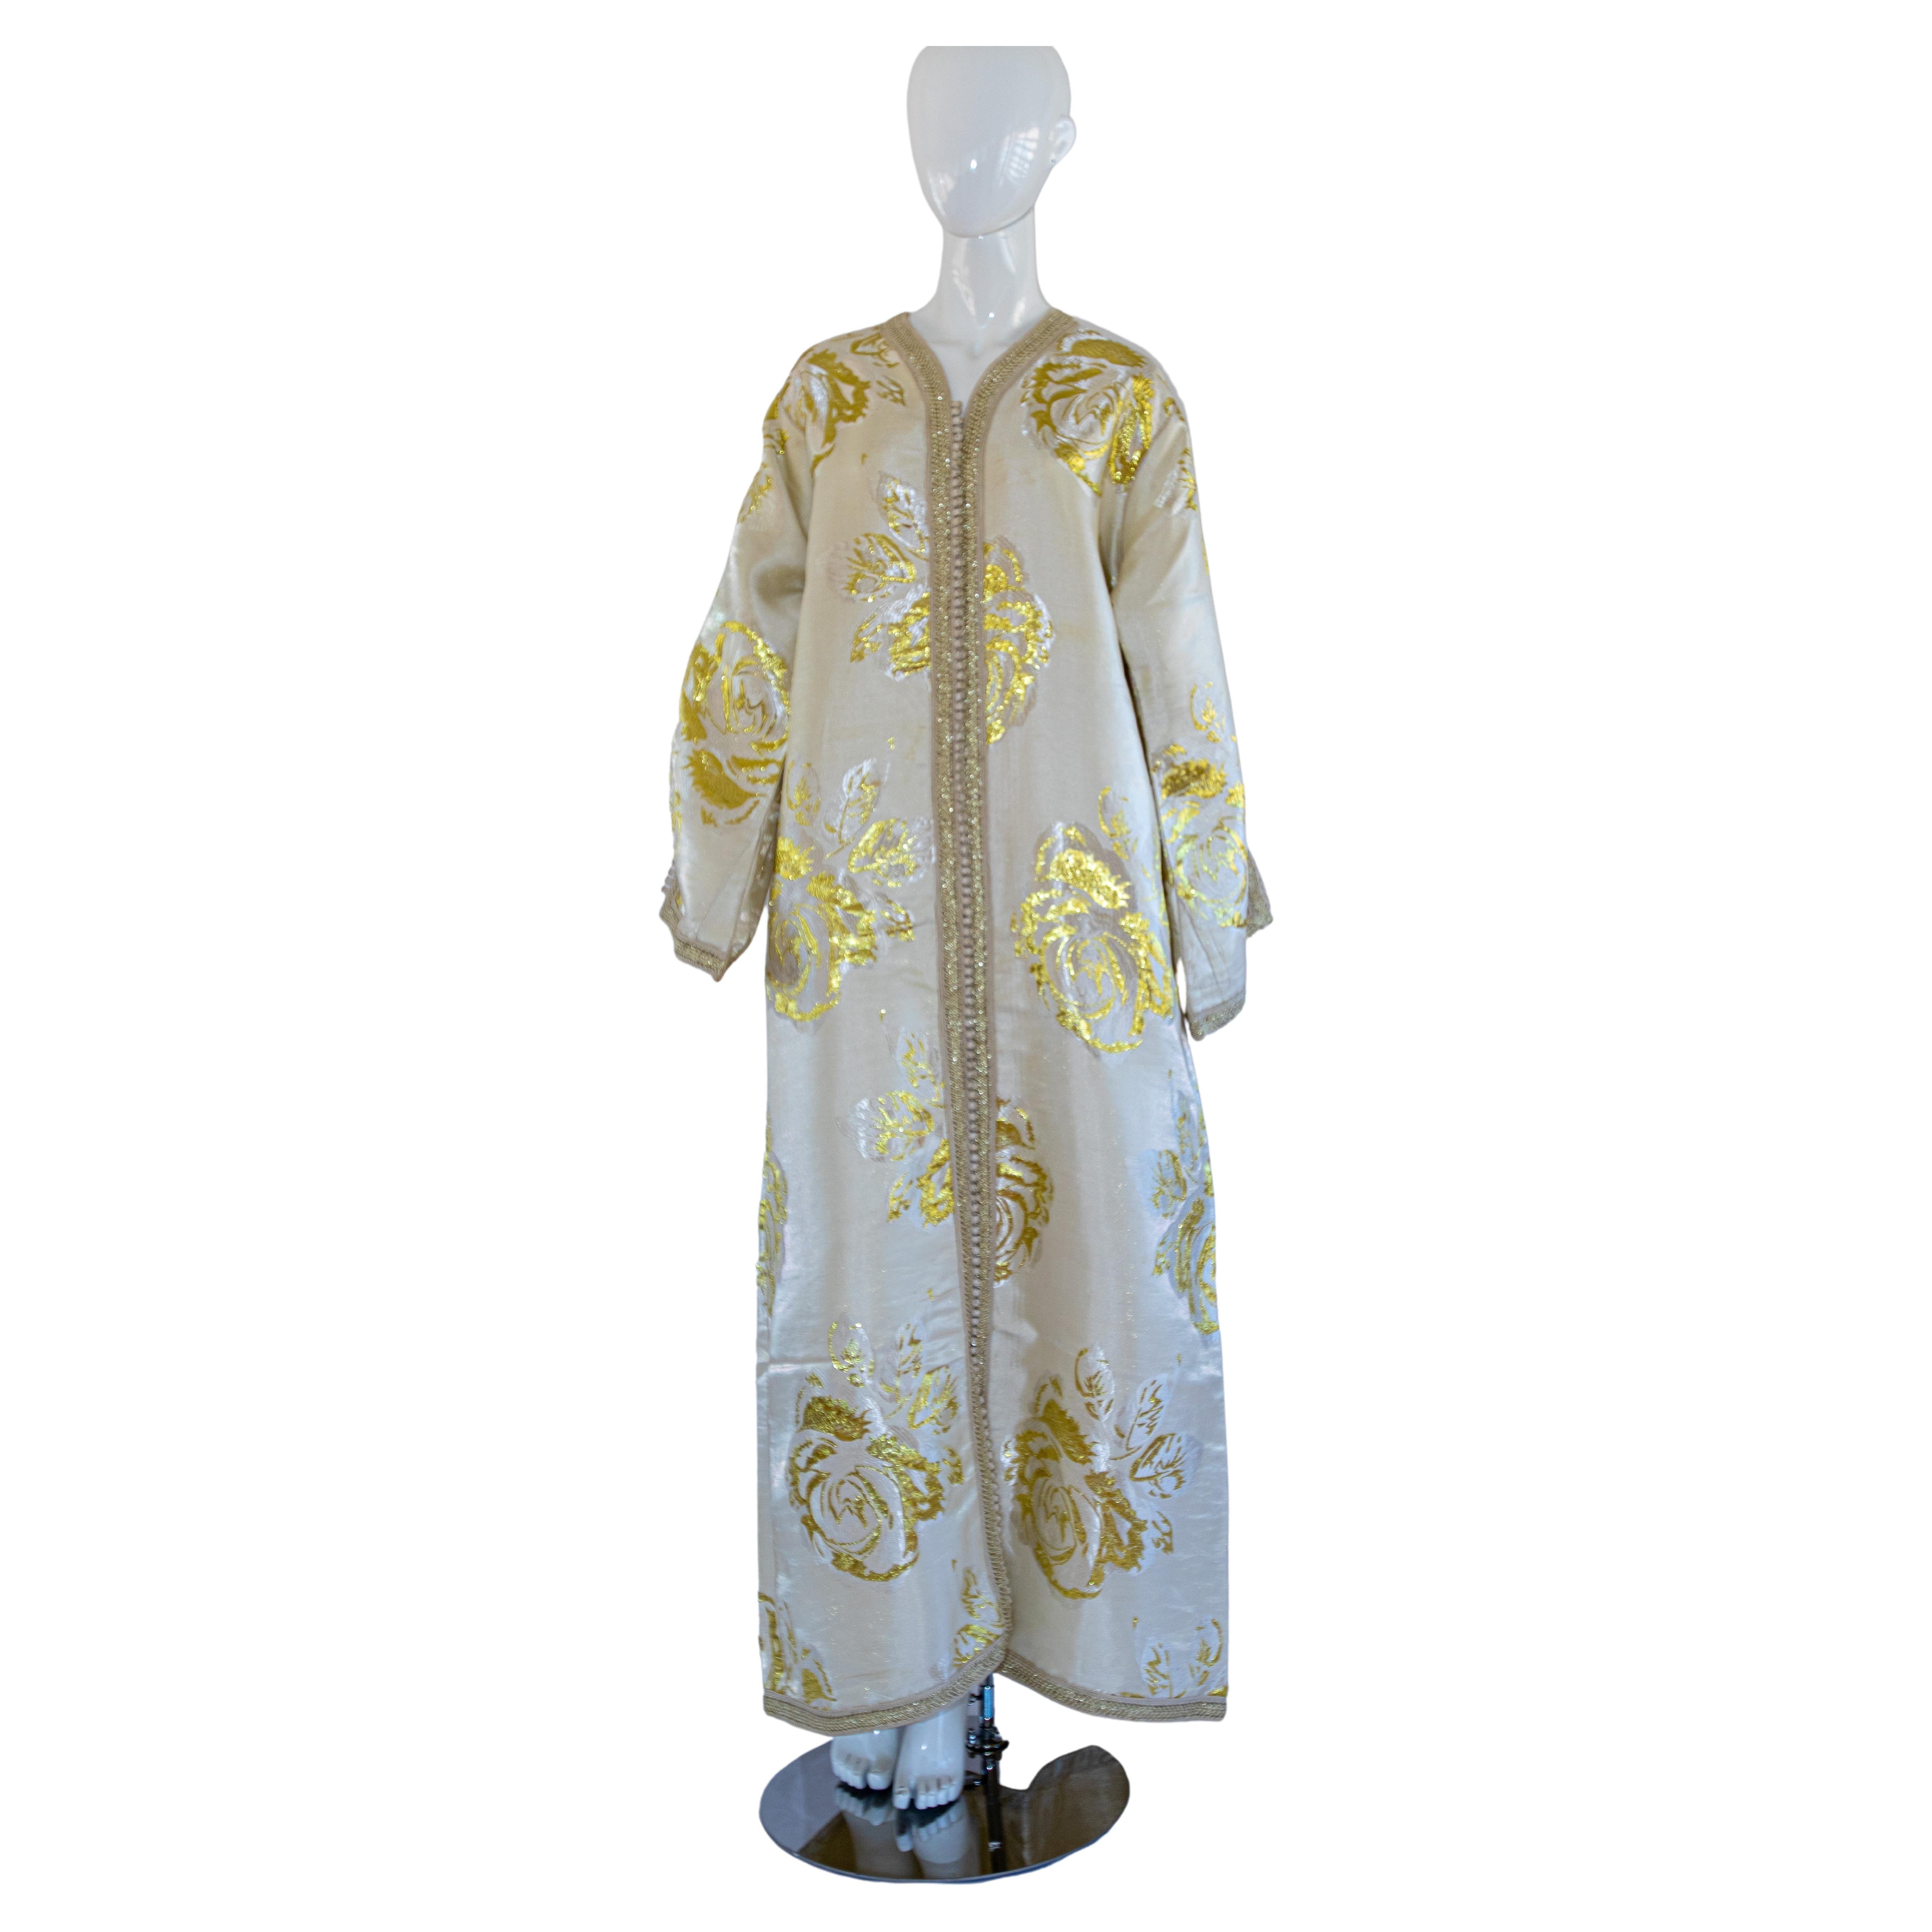 Vintage elegant Moroccan caftan white and gold lame metallic floral brocade,
circa 1970s.
It’s crafted in Morocco and tailored for a relaxed fit with wide sleeves
This long vintage maxi dress kaftan is embroidered and embellished entirely by